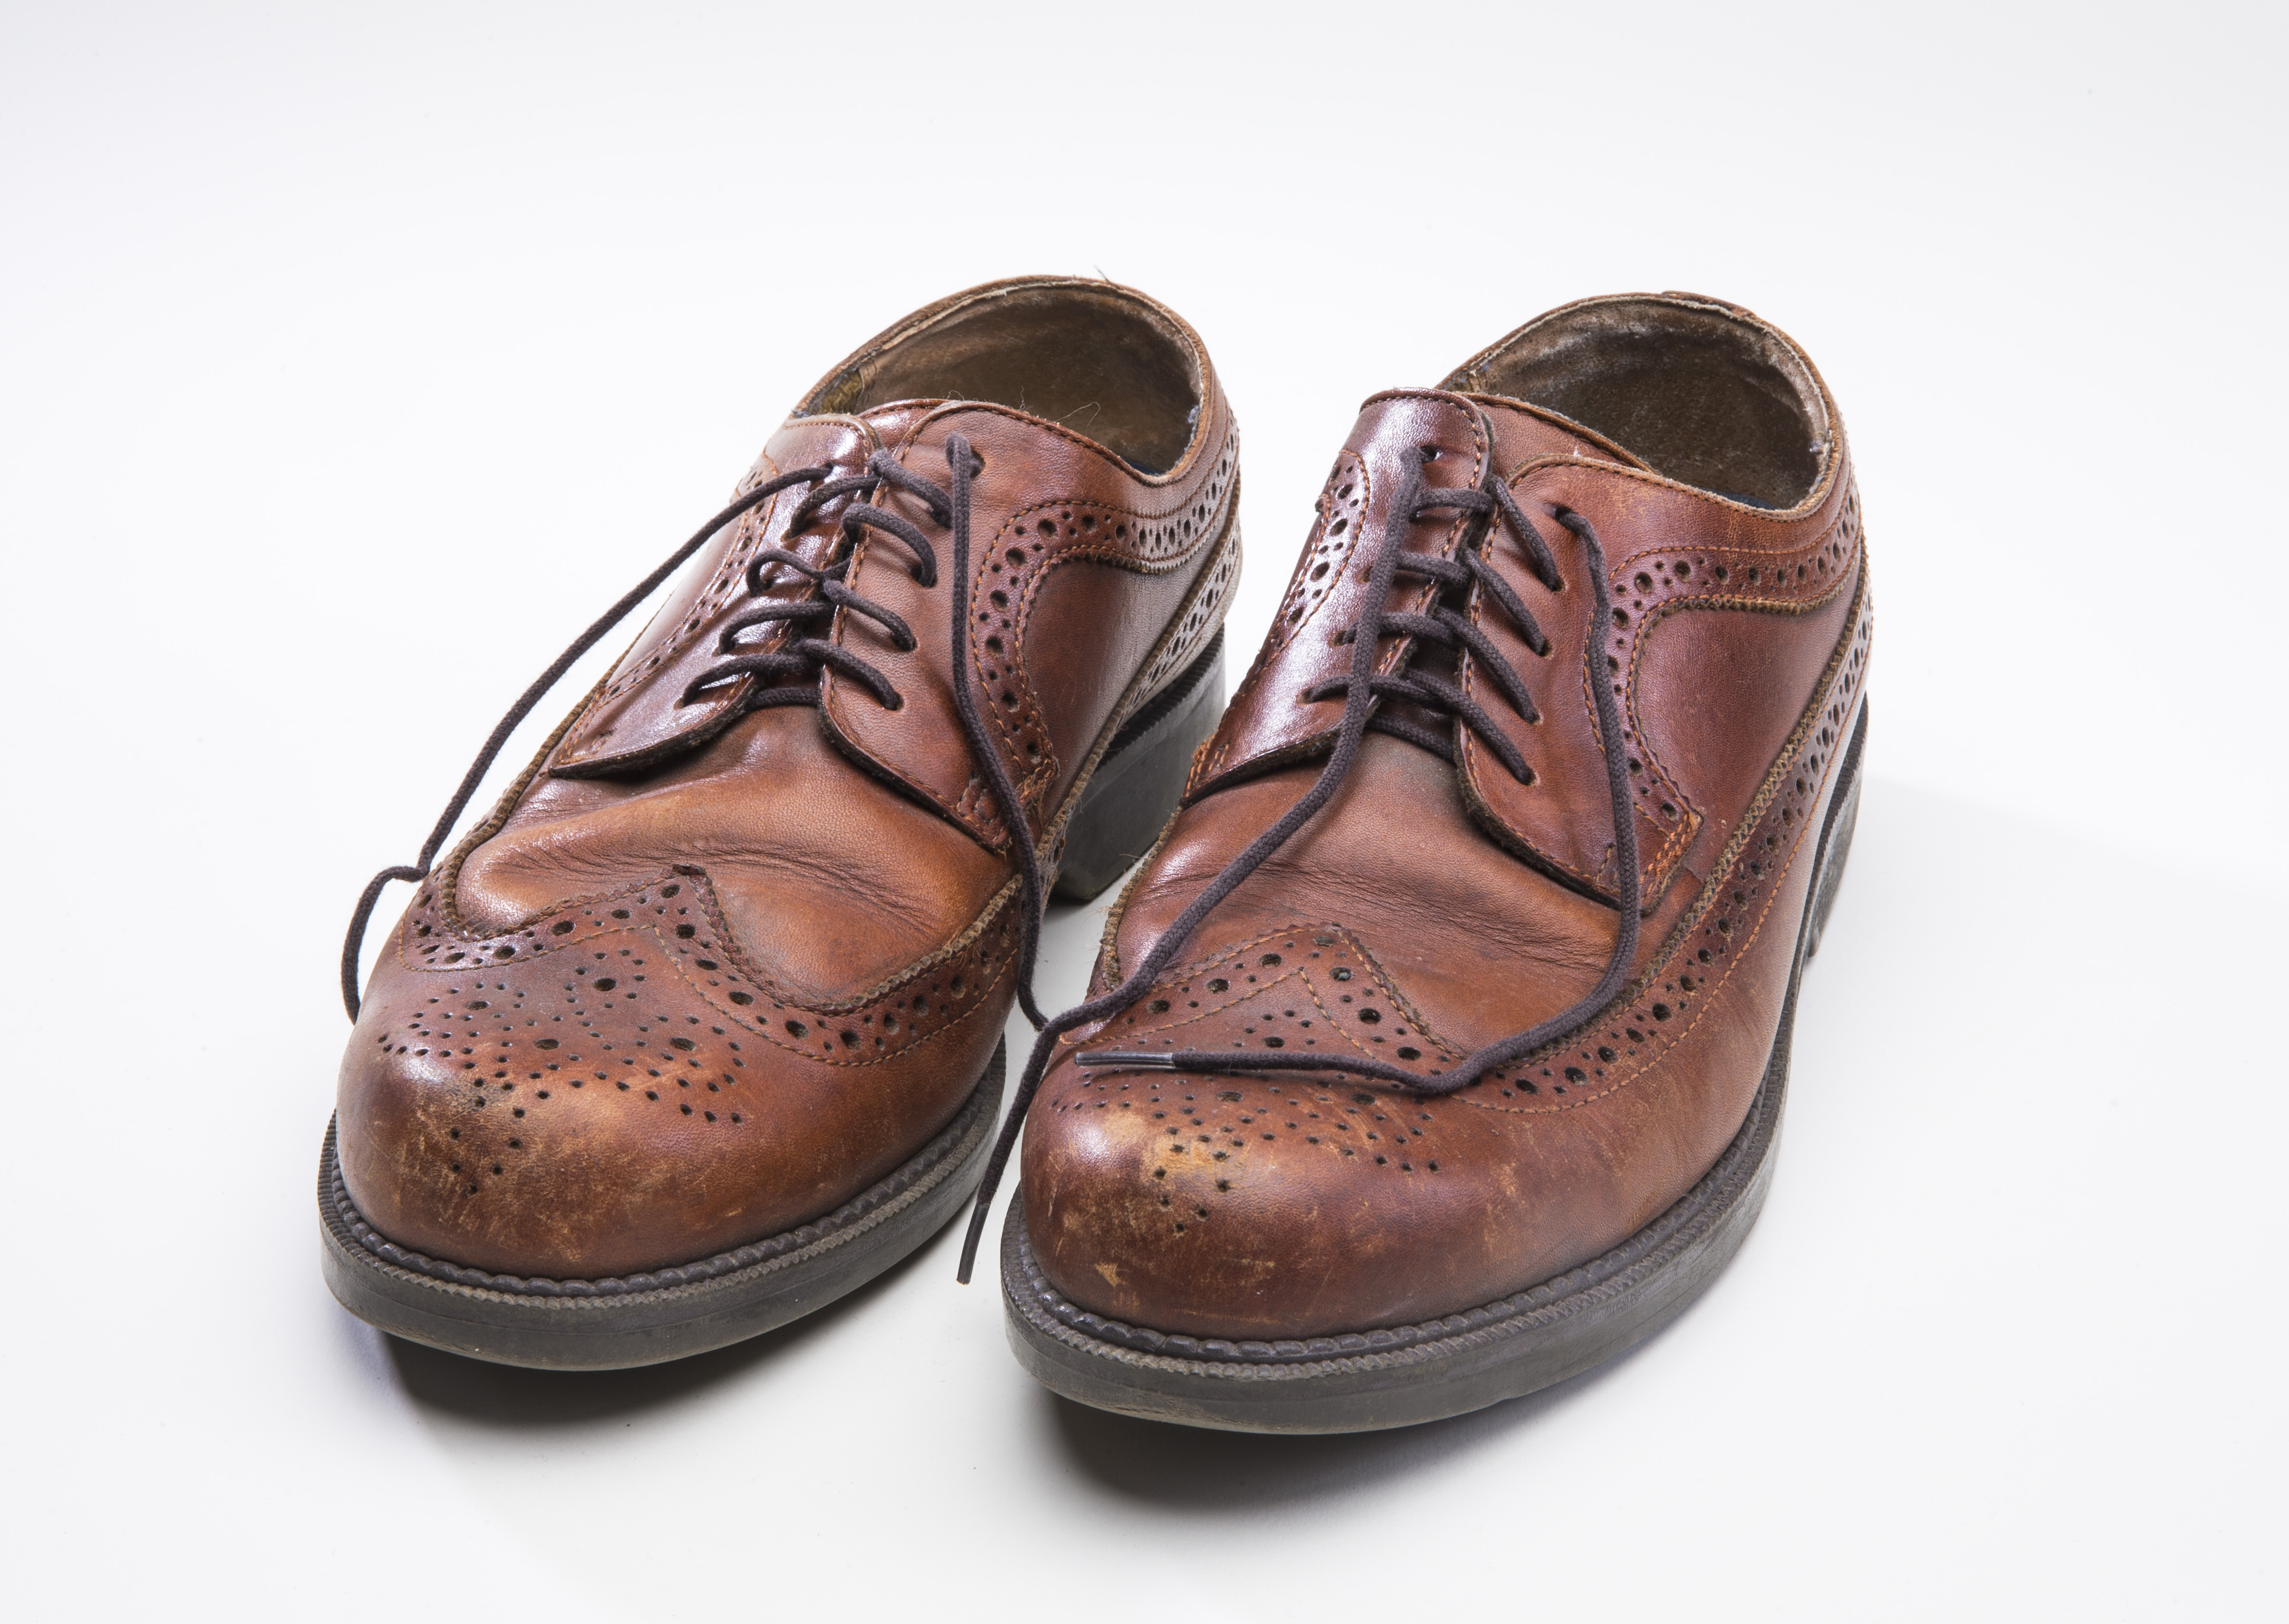 A pair of brown leather dress shoes owned by a 9/11 survivor are displayed on a white surface in the Museum.